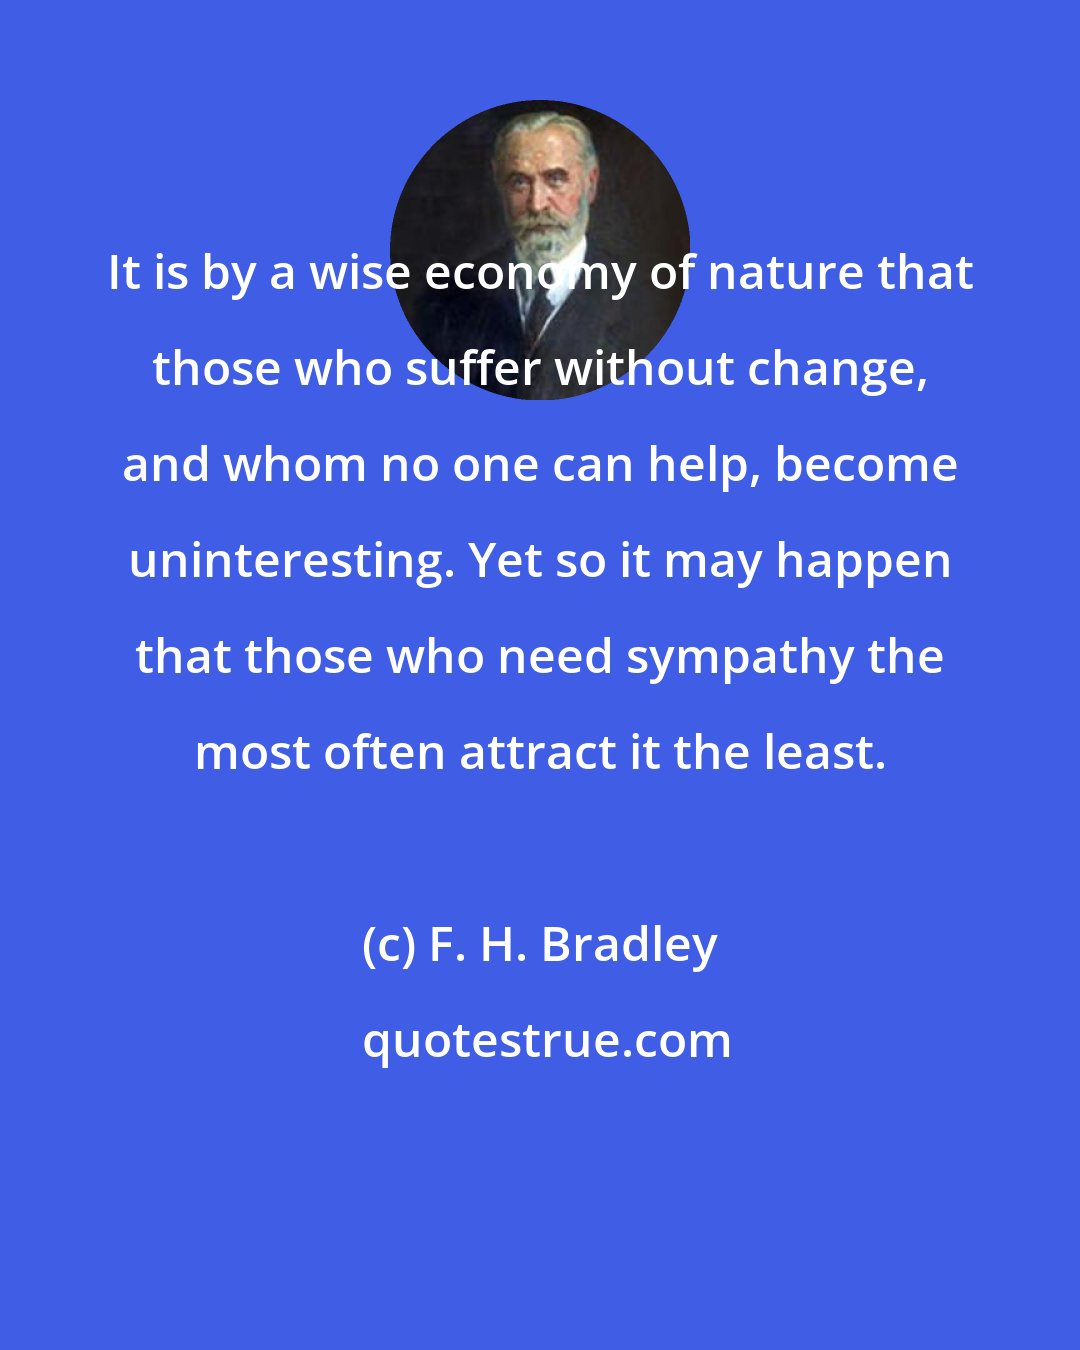 F. H. Bradley: It is by a wise economy of nature that those who suffer without change, and whom no one can help, become uninteresting. Yet so it may happen that those who need sympathy the most often attract it the least.